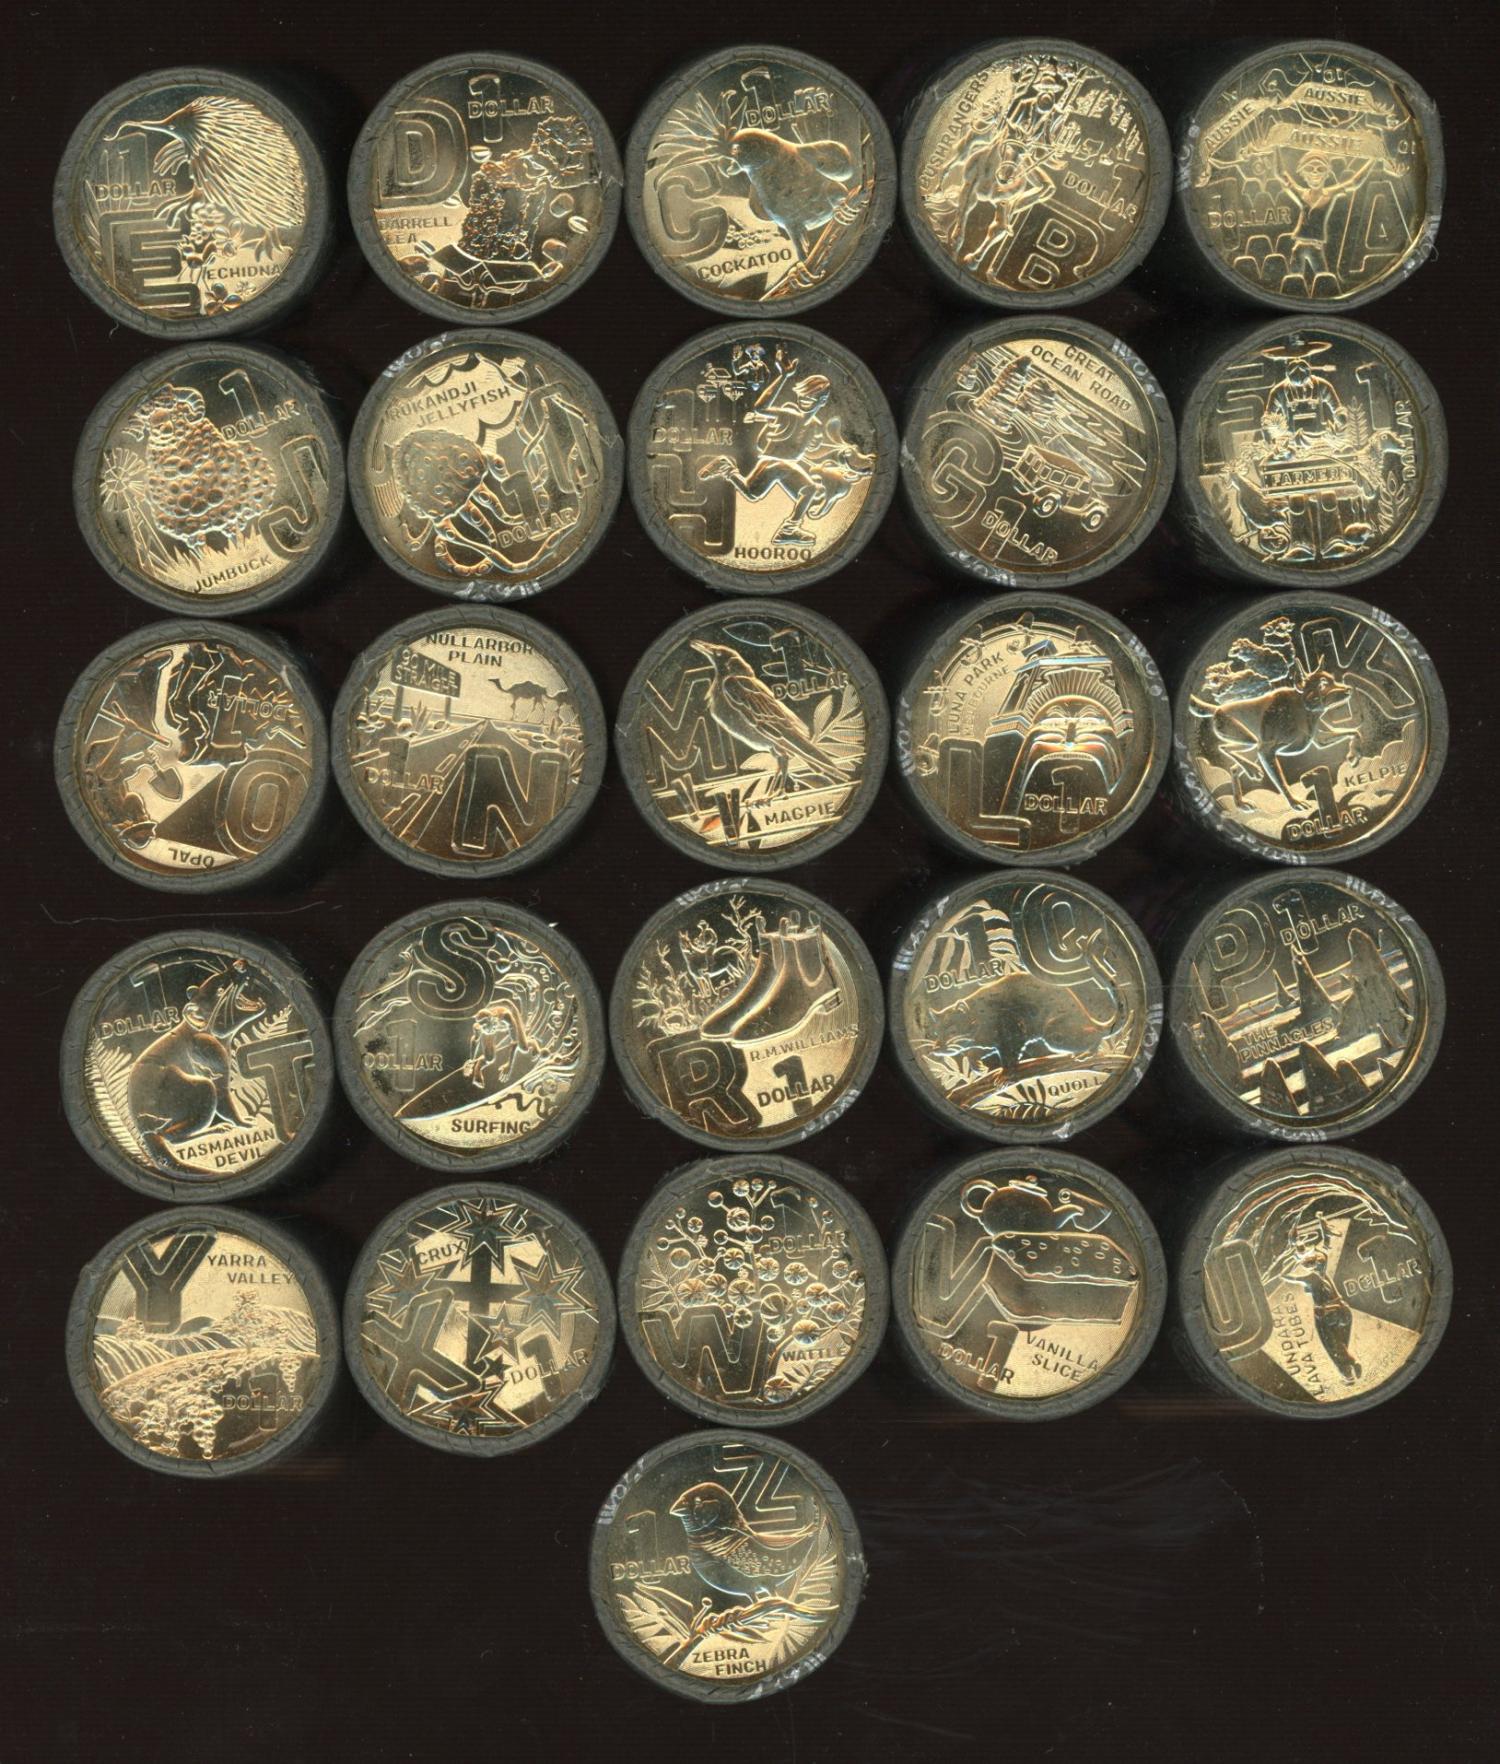 Thumbnail for 2022 Full Set of 26 $1 Rolls of 20 Coins Aussie Alphabet - A to Z Complete UNC